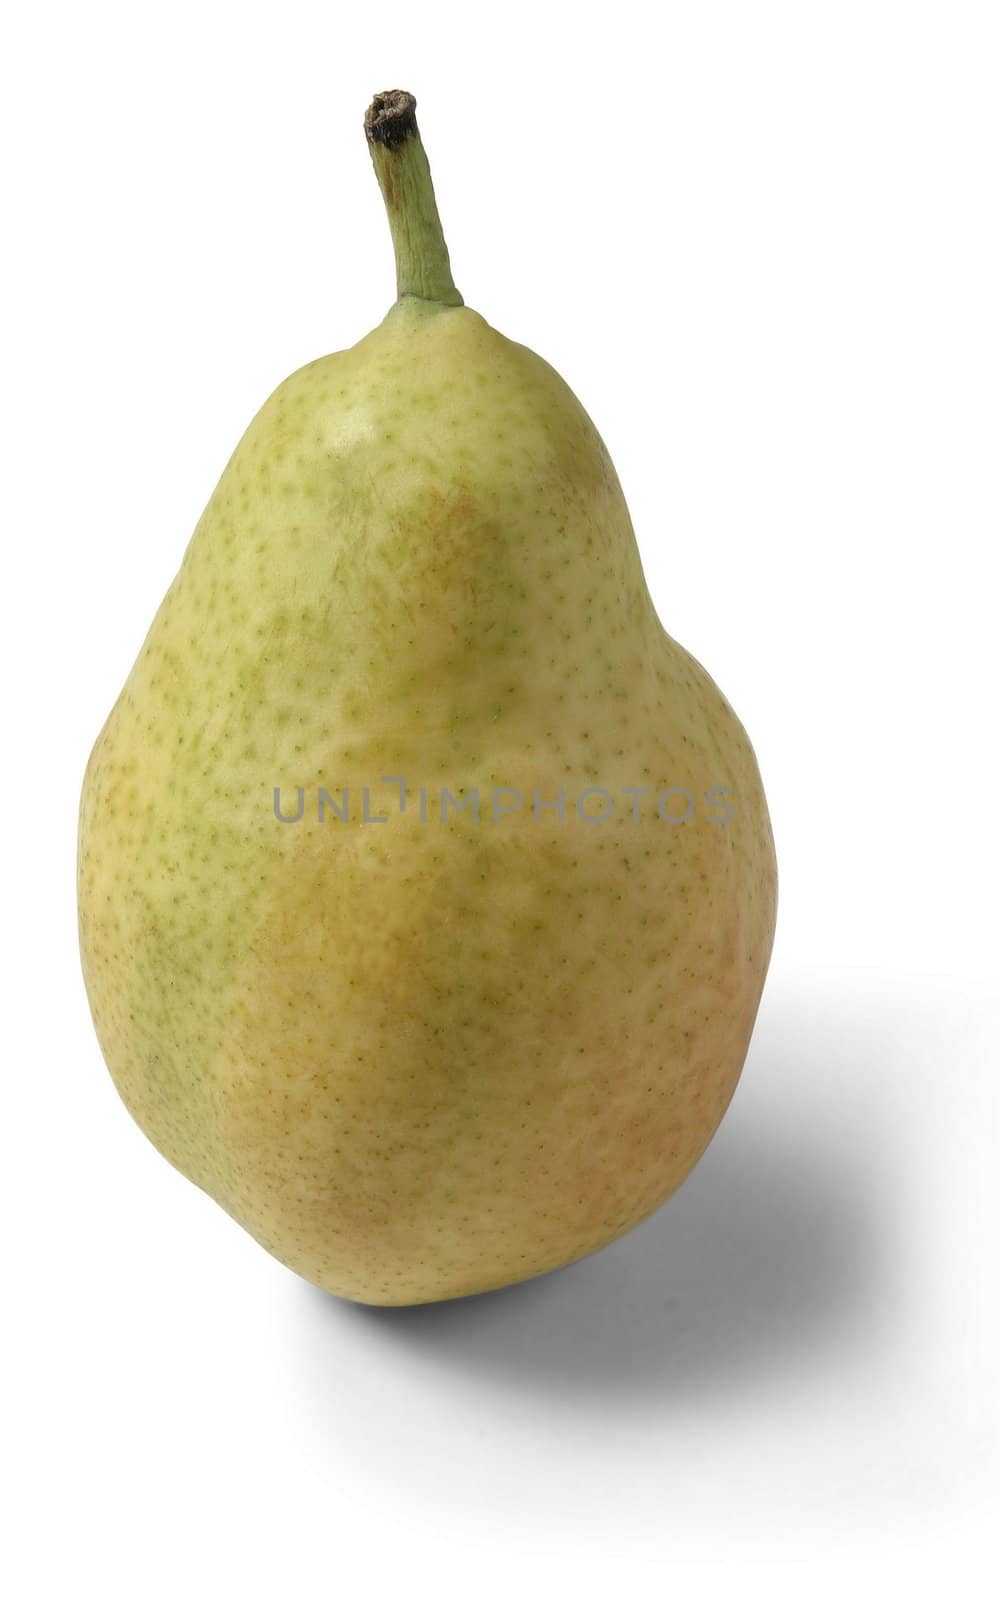 One ripe and yellow pear on a white background